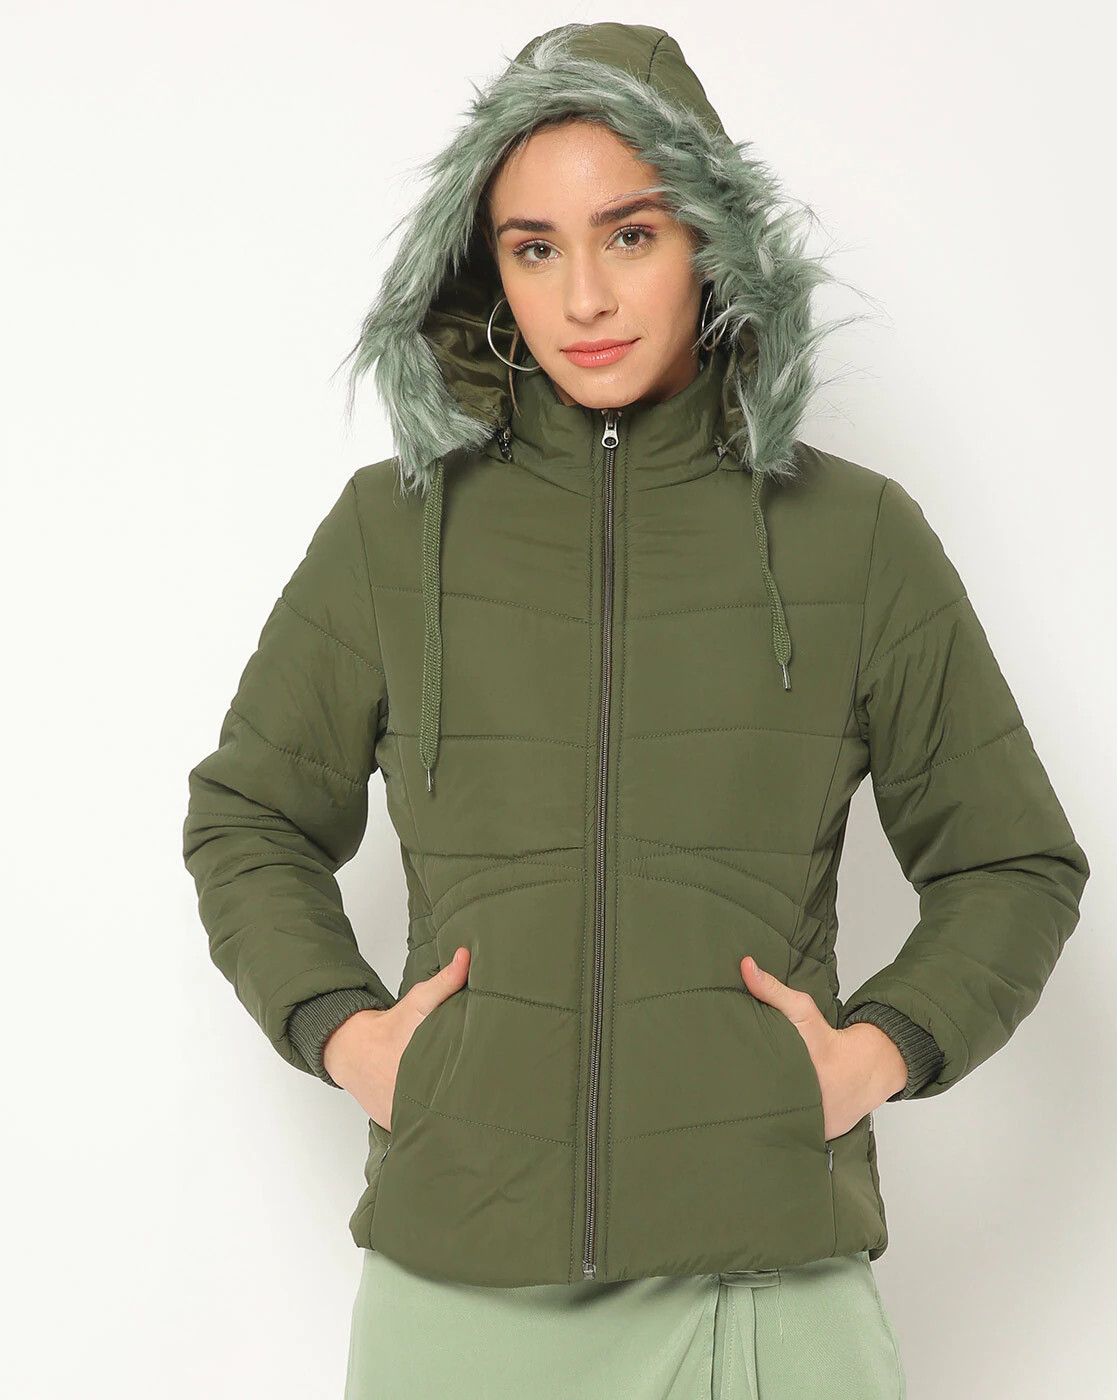 Buy FORT COLLINS Quilted Bomber Jacket with Fur-Lined Hood